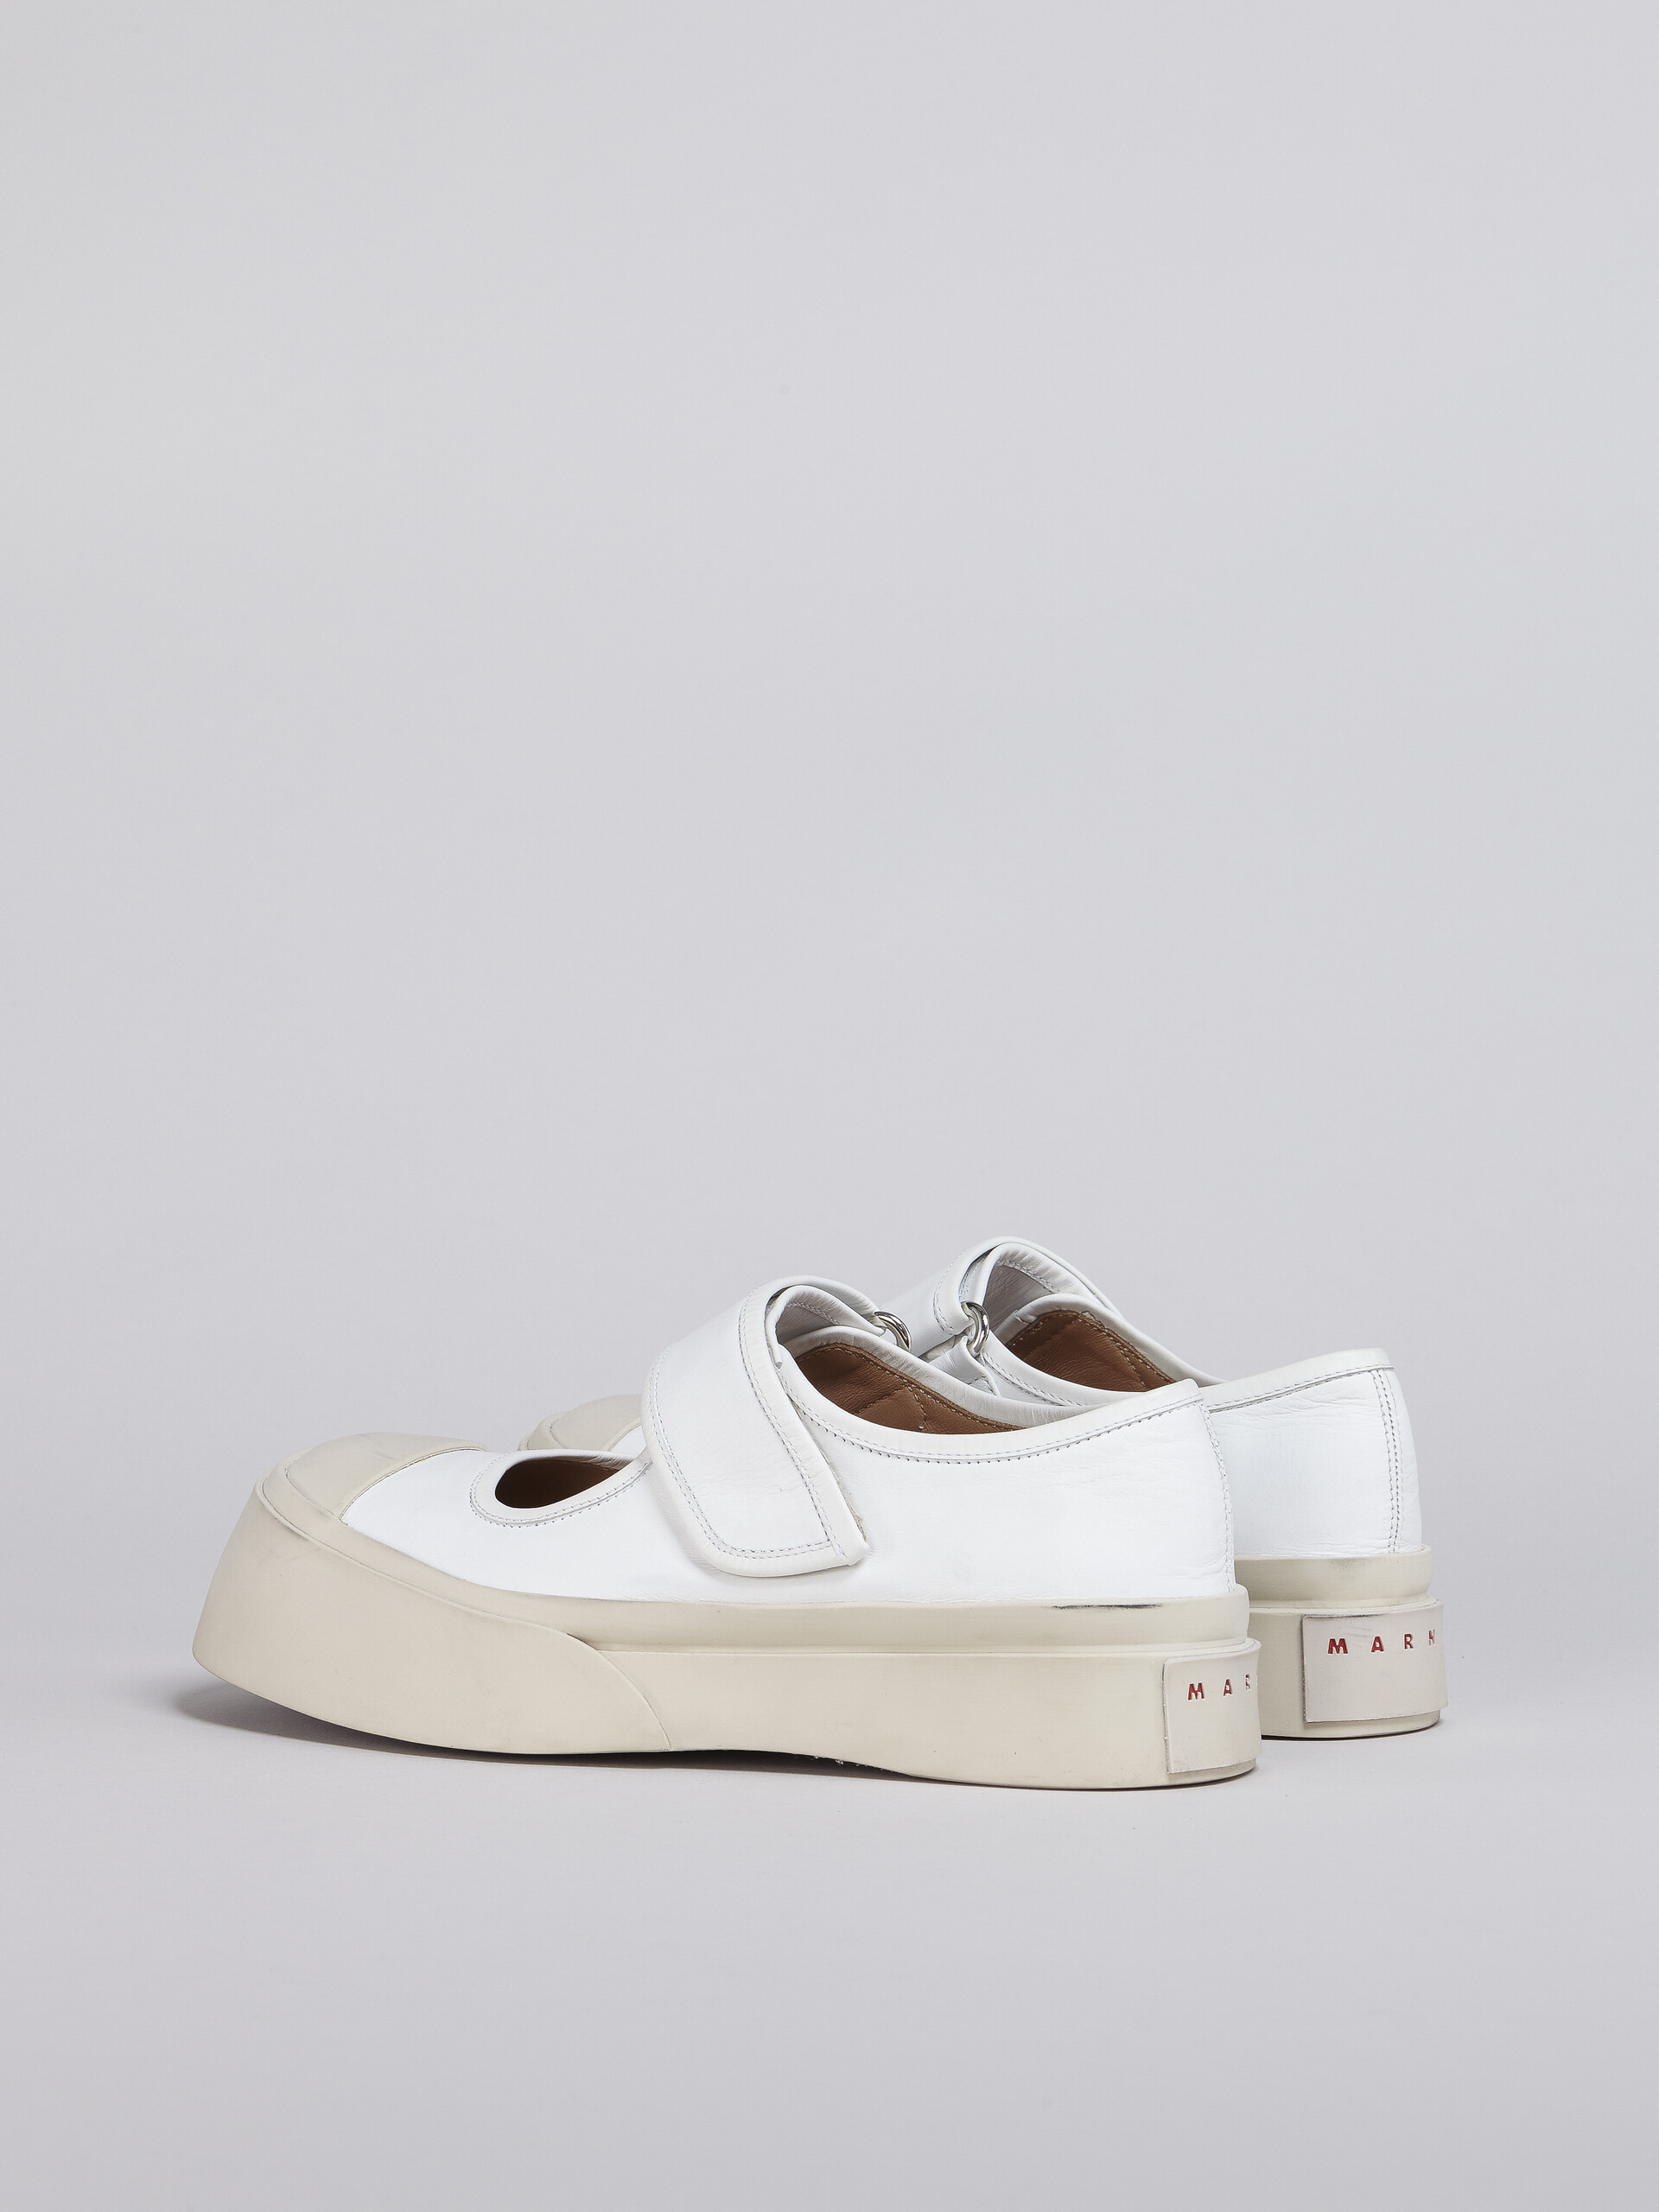 Calf leather PABLO Mary-Jane sneaker - Sneakers - Image 3